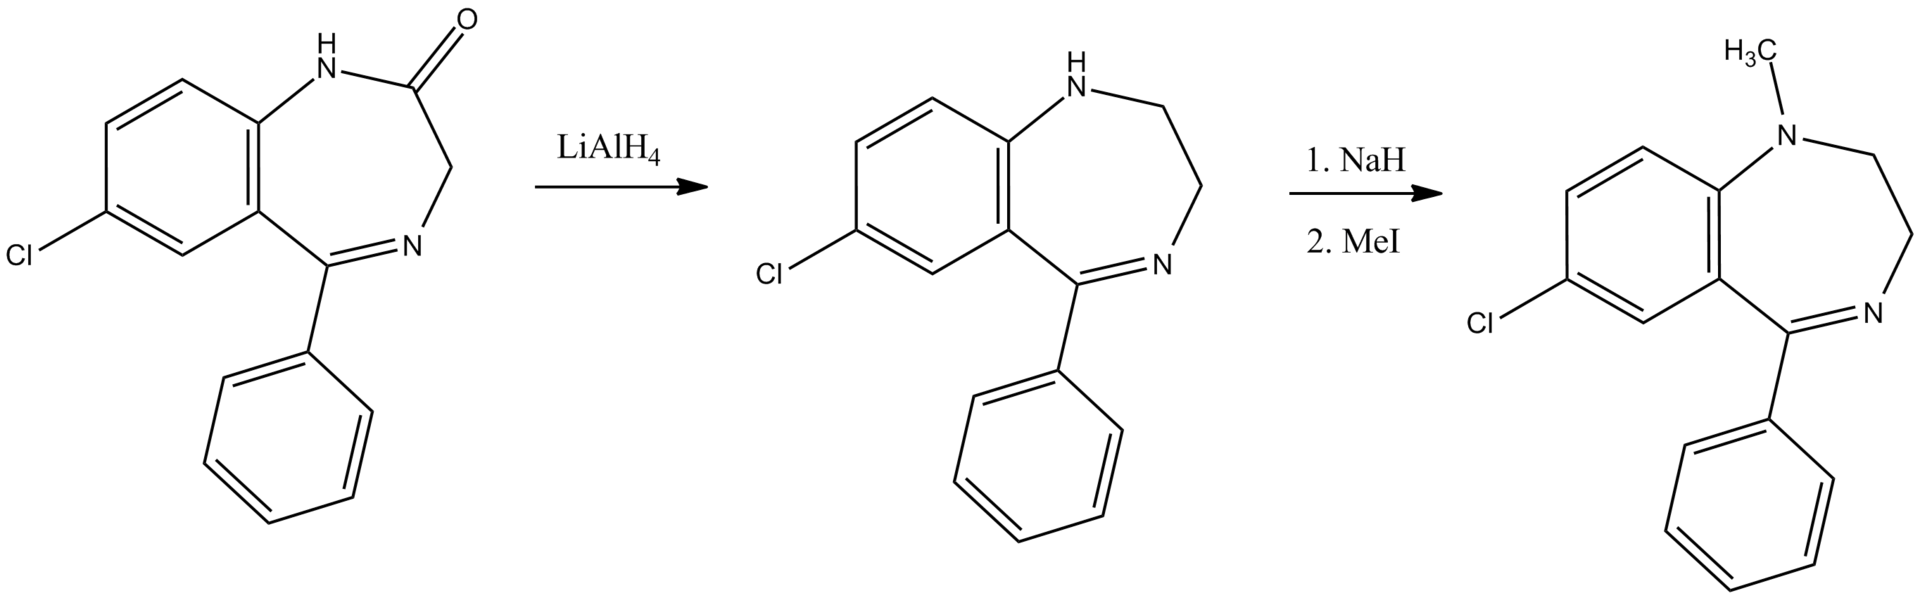 File:Medazepam synthesis 2.png